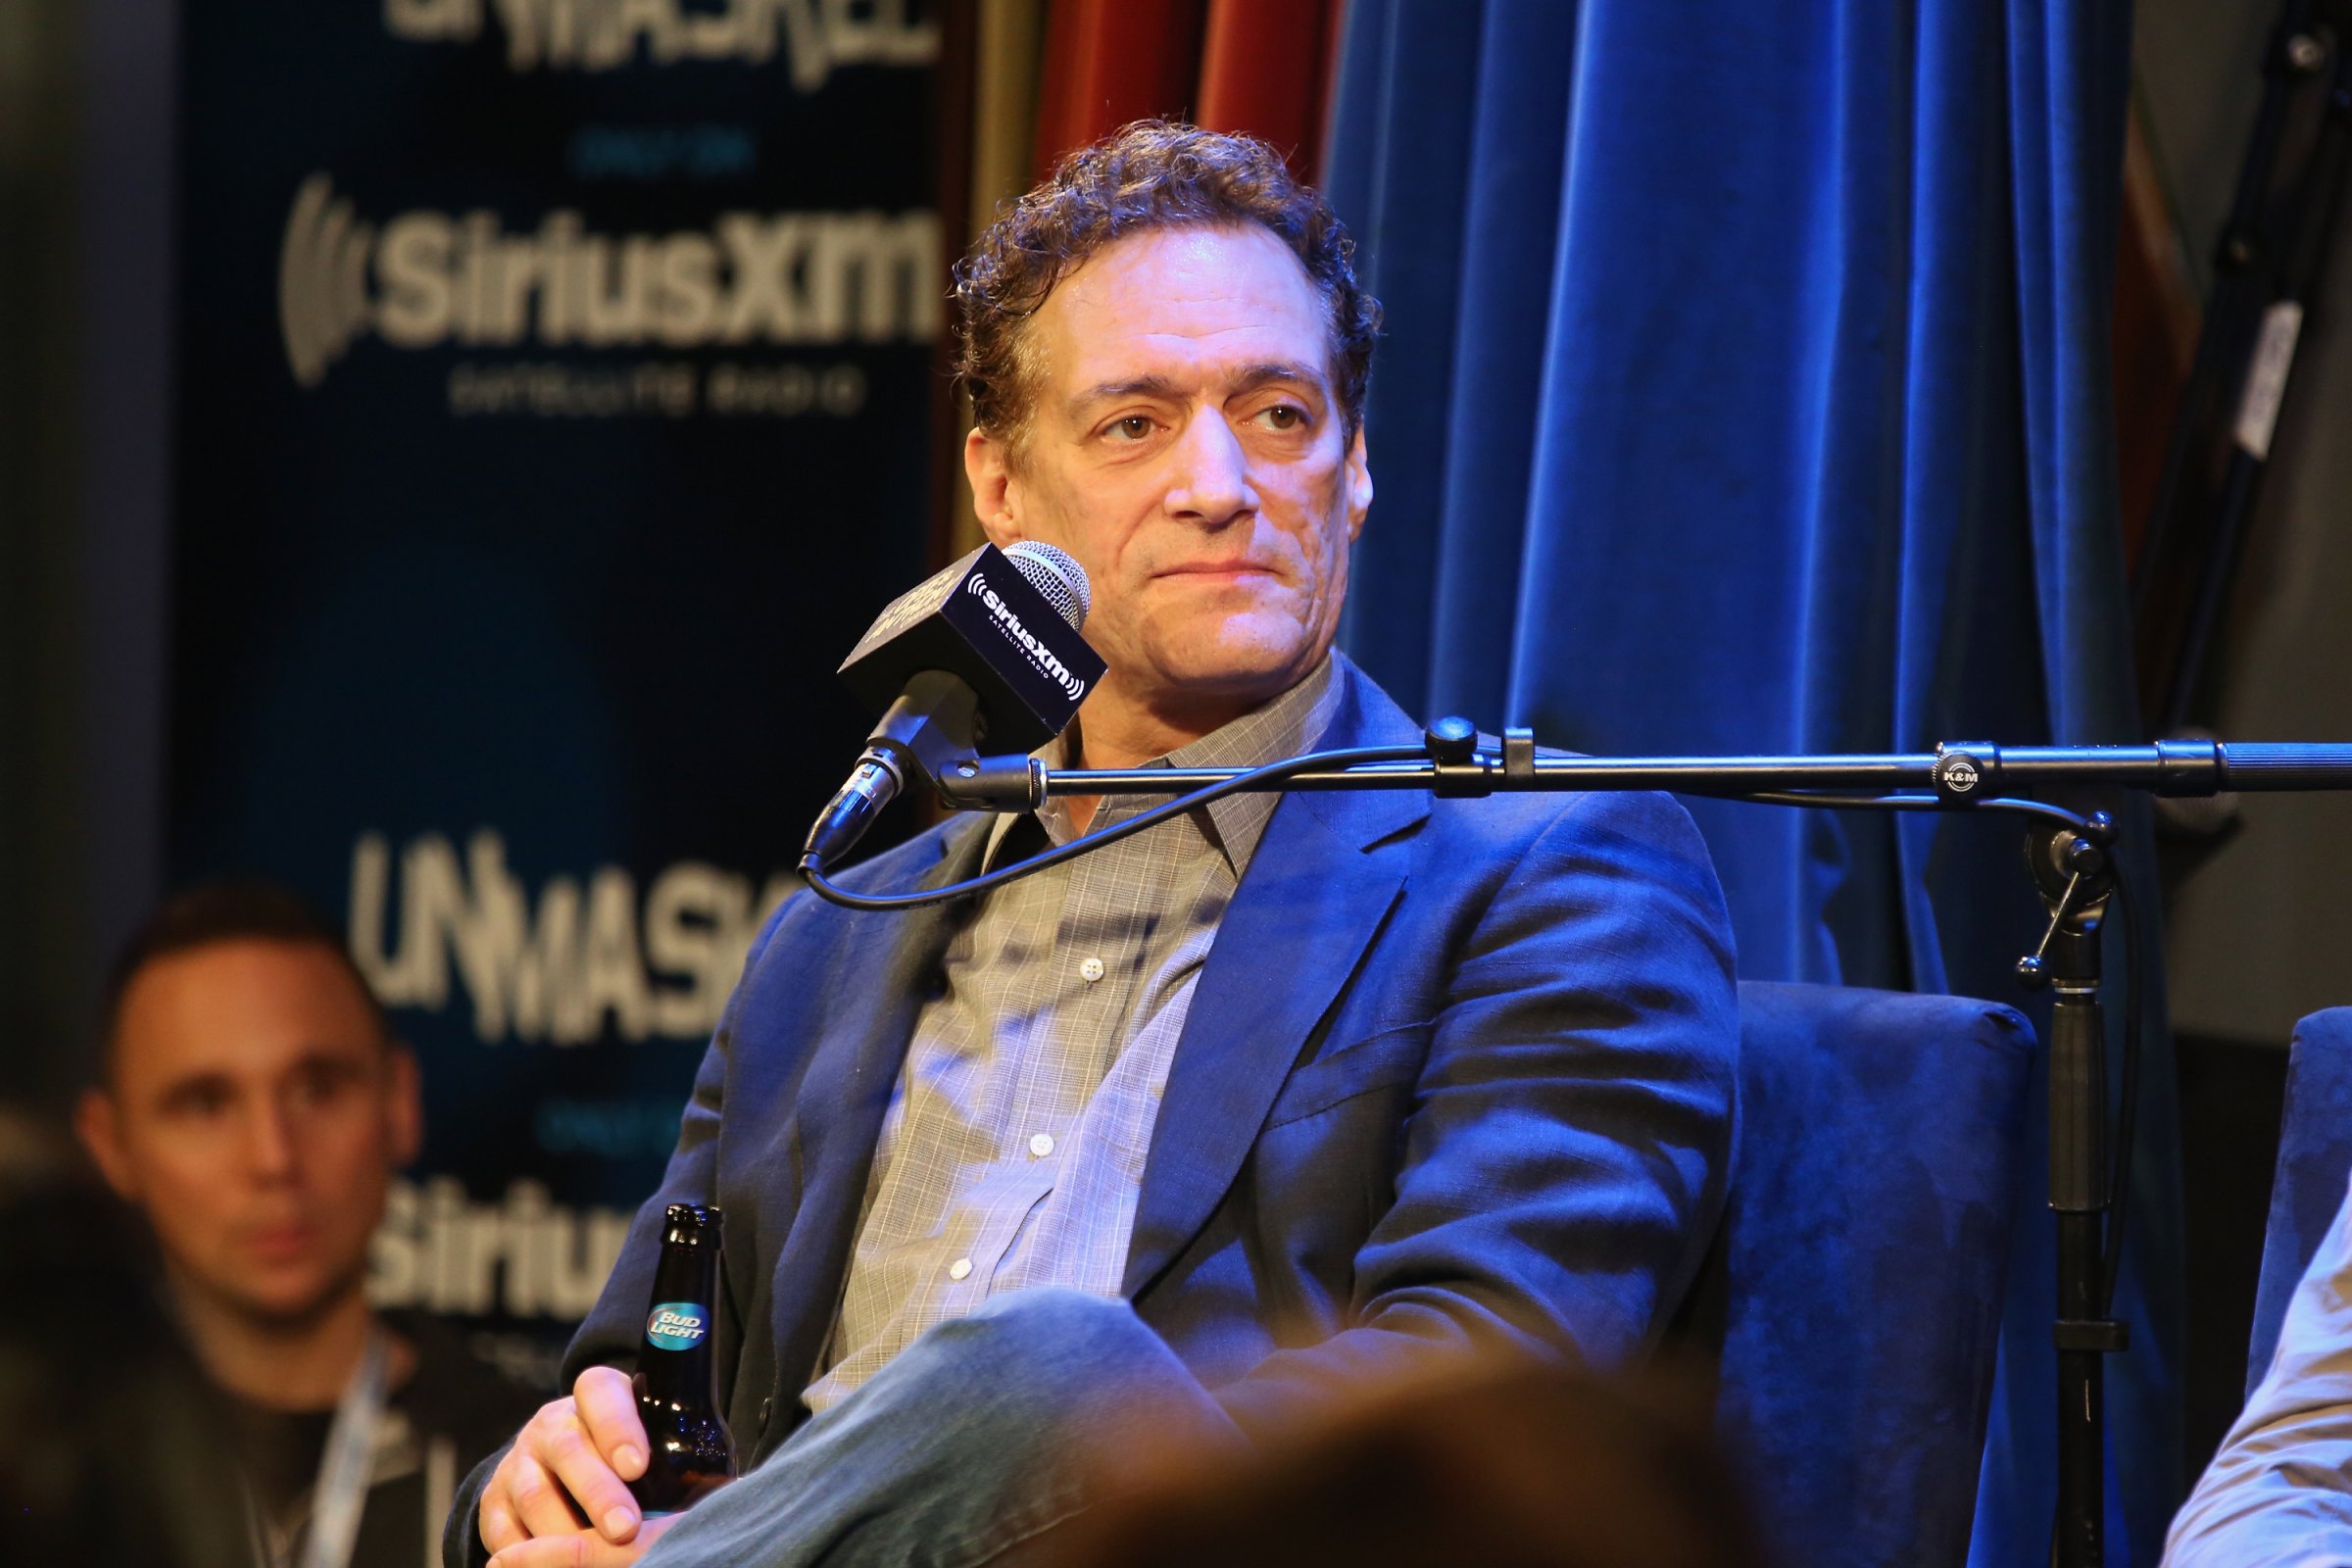 Anthony Cumia, 54, is accused of assaulting a 26-year-old woman in his New York home, police said.